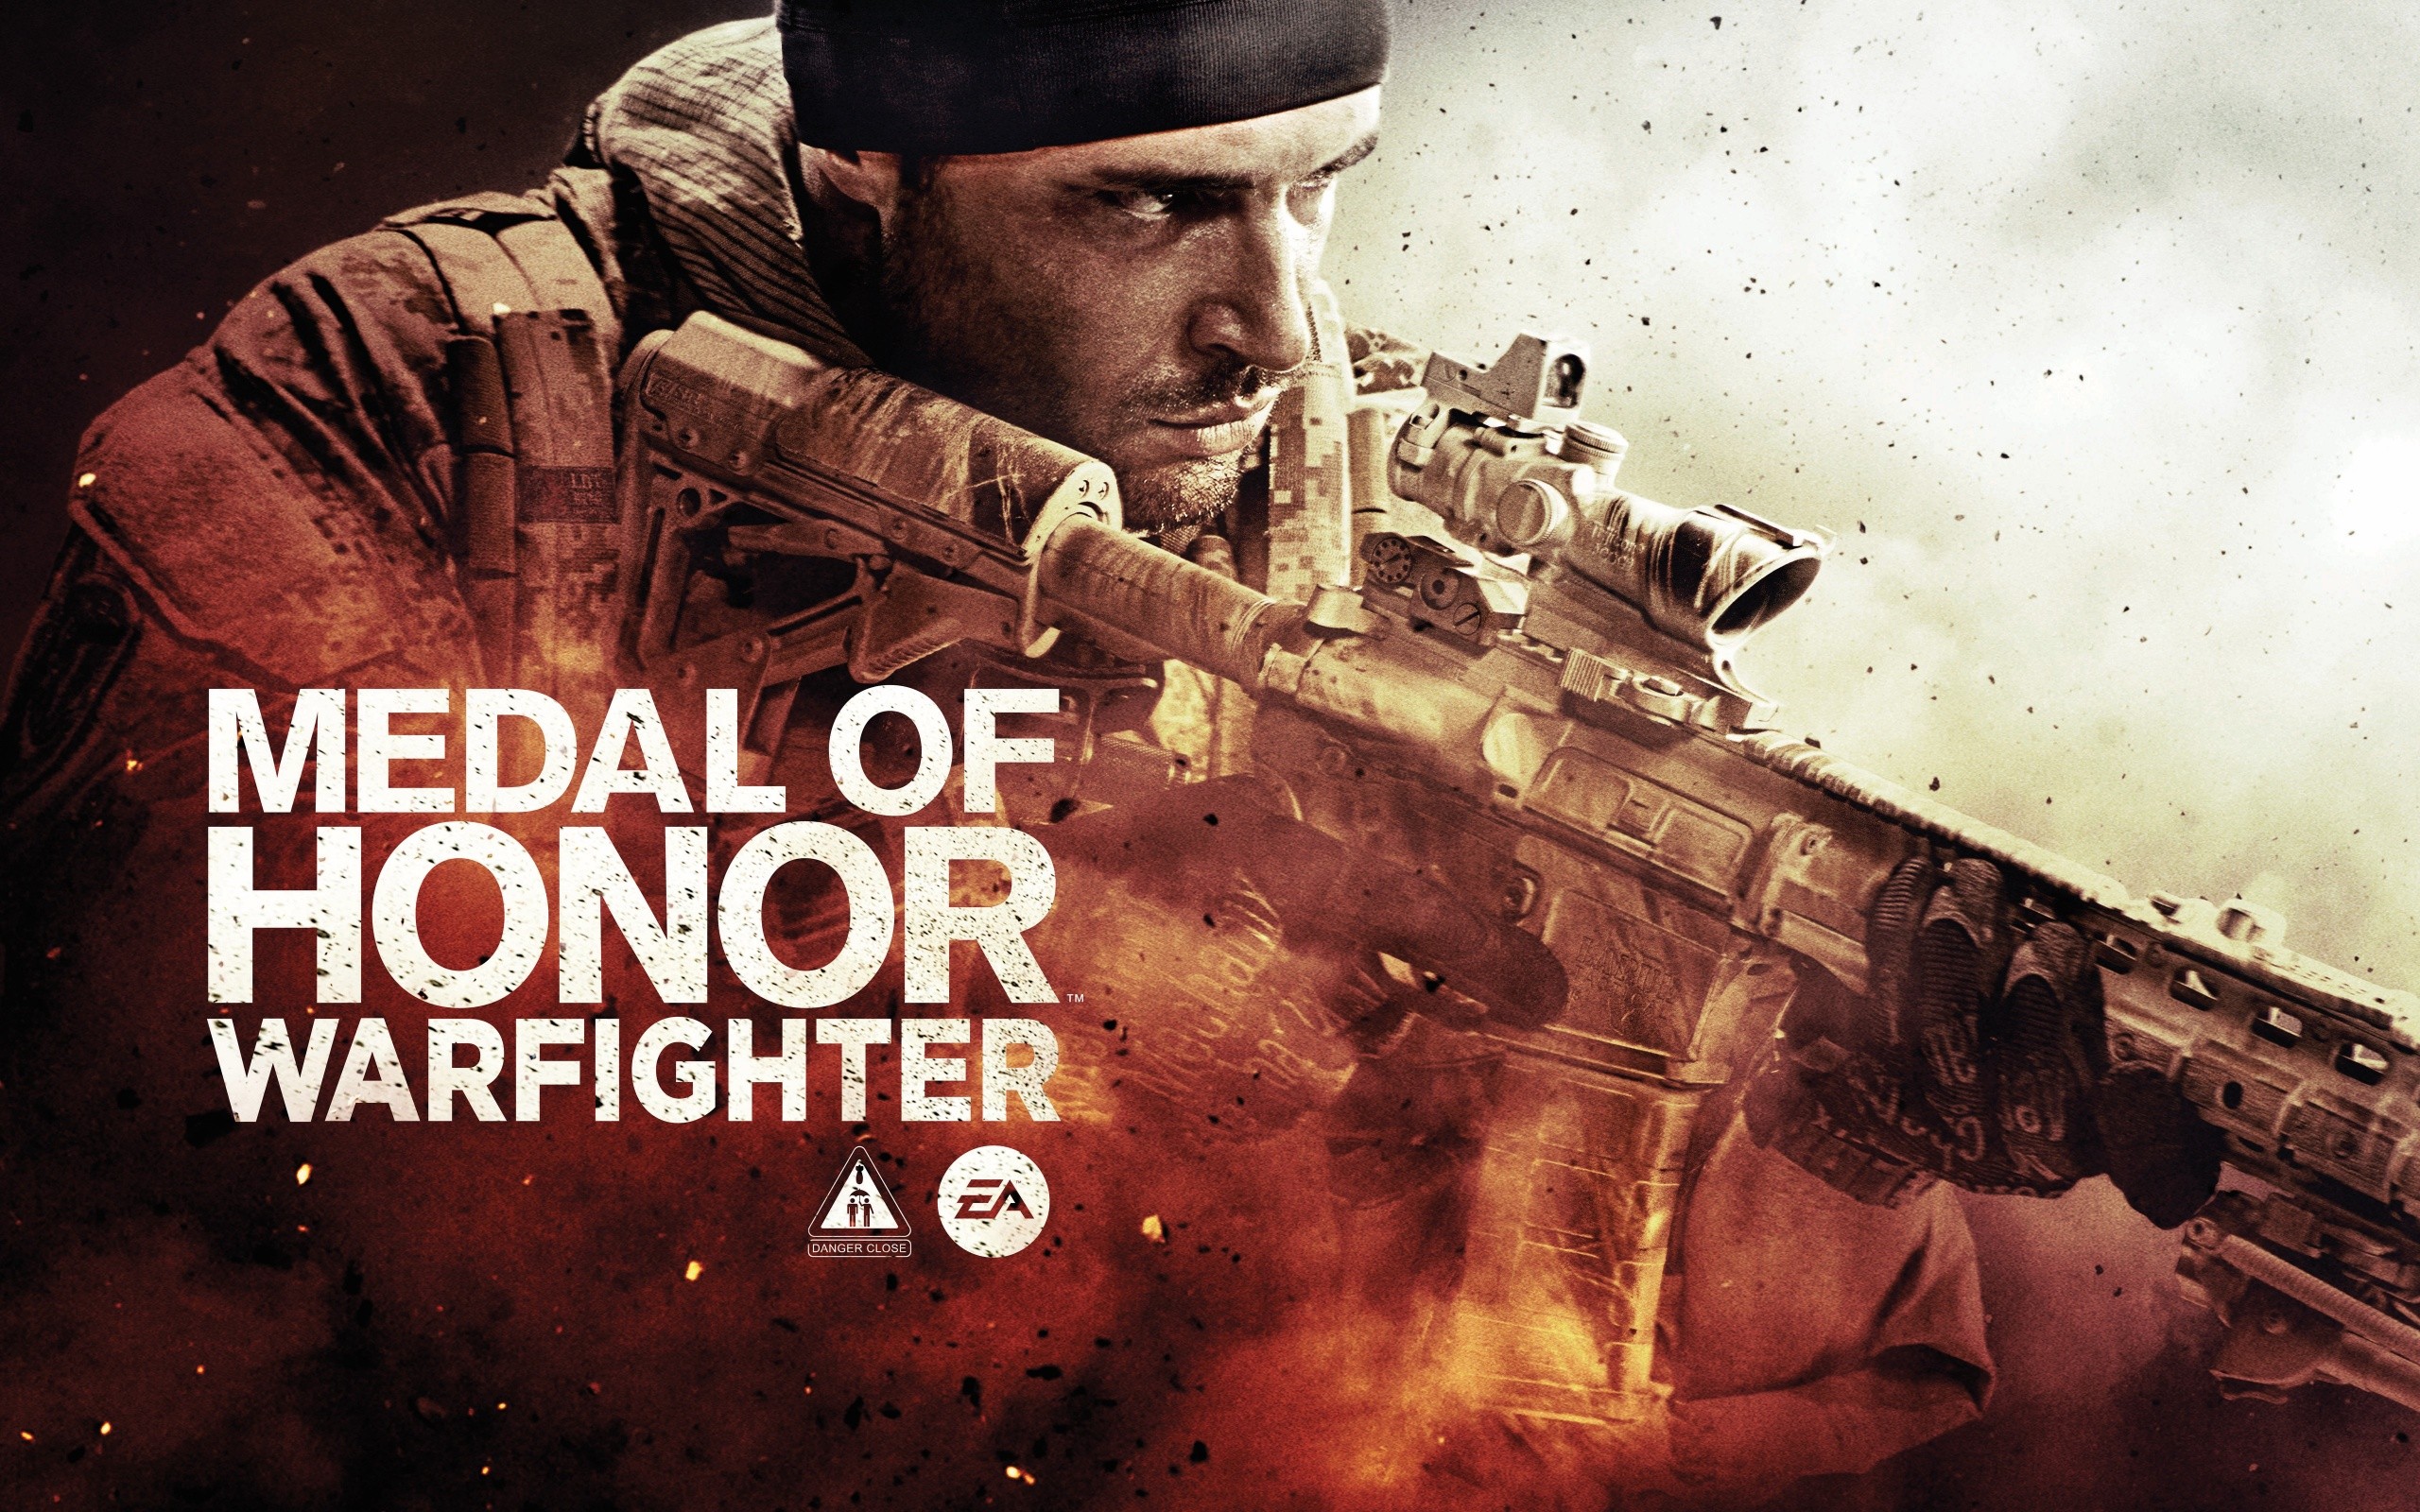 Download the Medal of Honor Warfighter Wallpaper, Medal of Honor